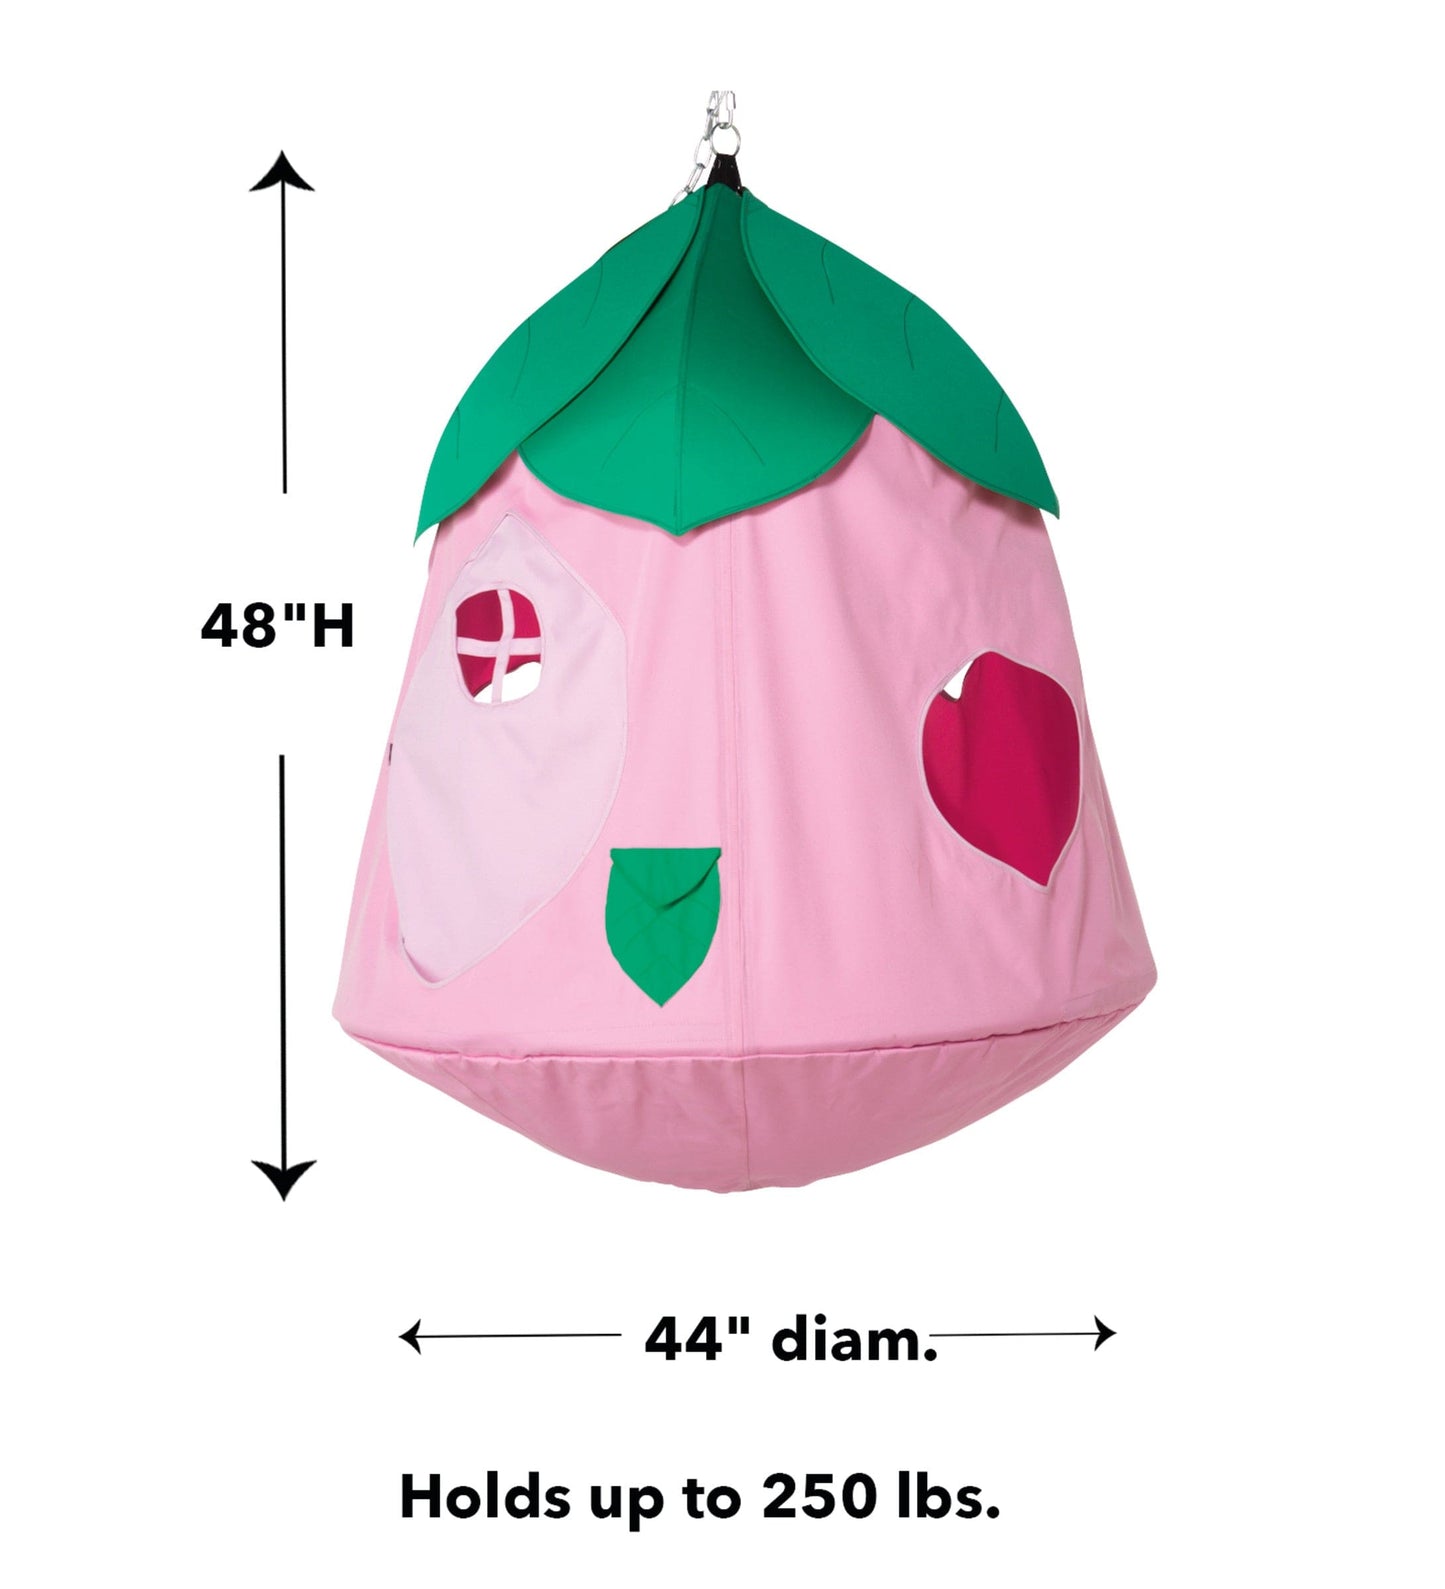 Cozy Posy HugglePod HangOut Nylon Hanging Tent and Crescent Stand Set